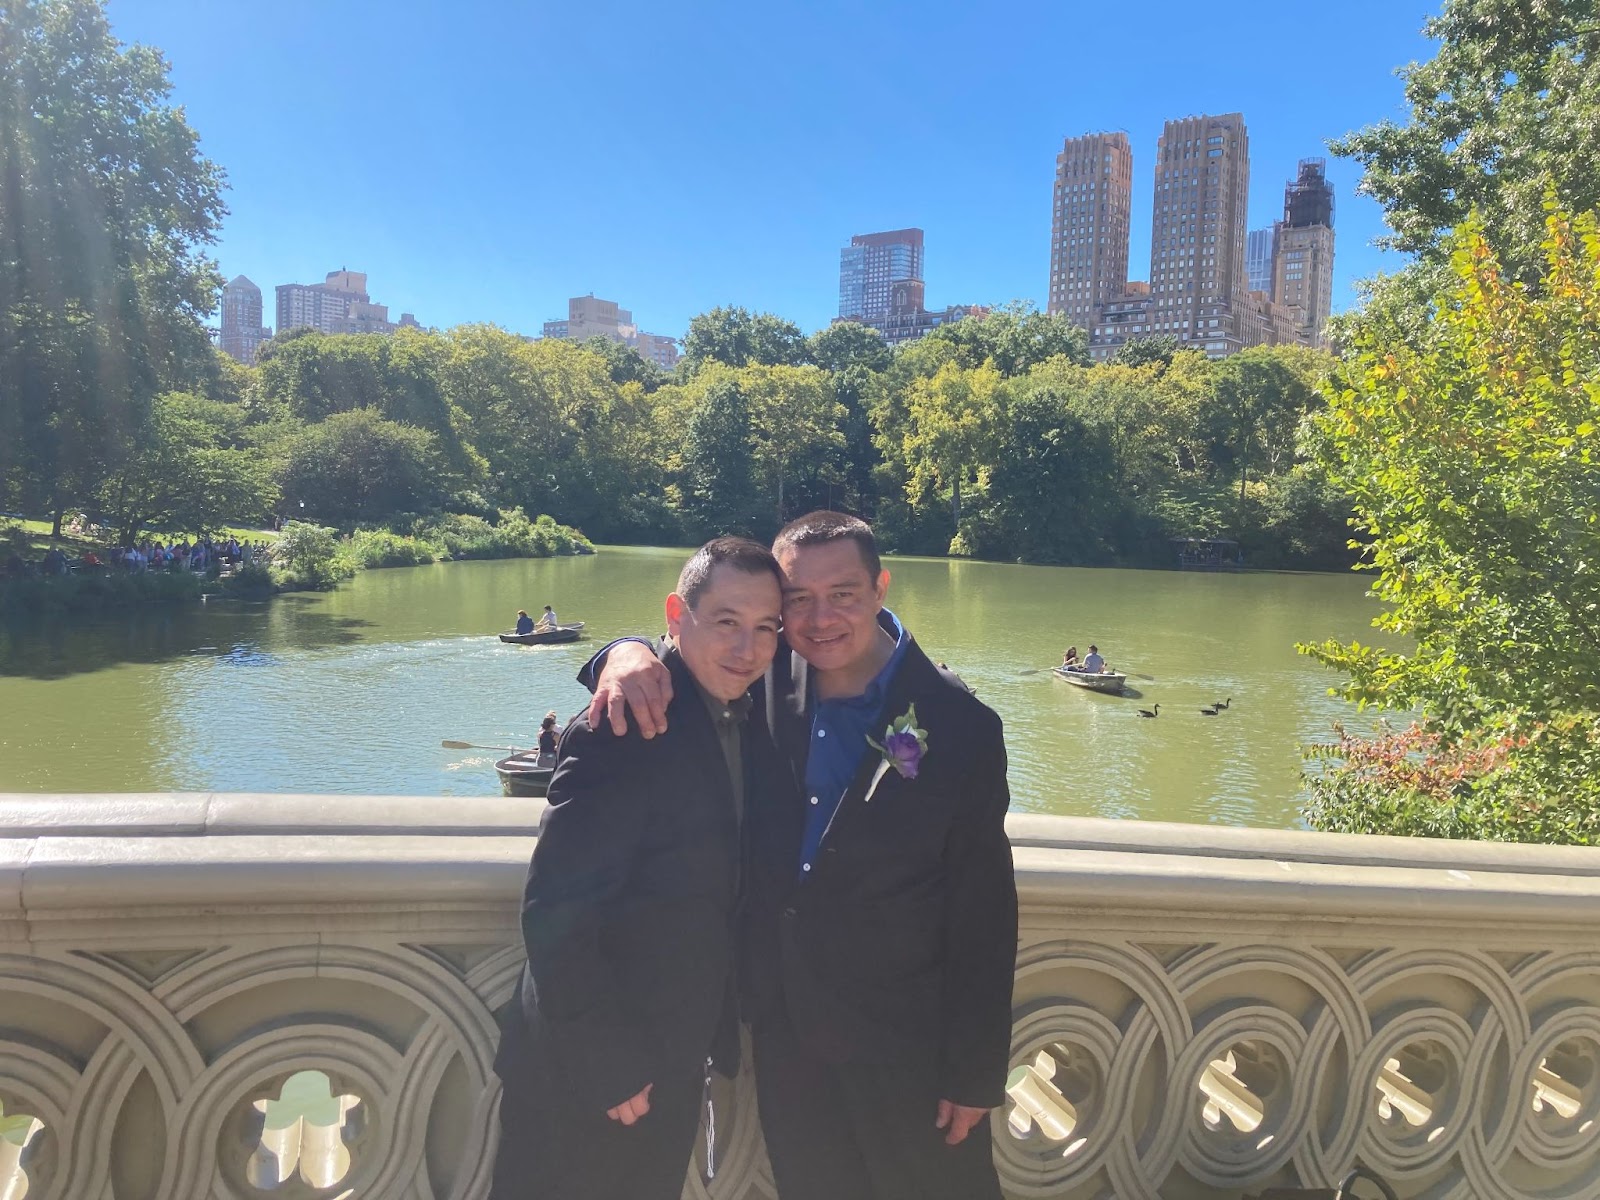 A couple stand hugging on a bridge in Central Park